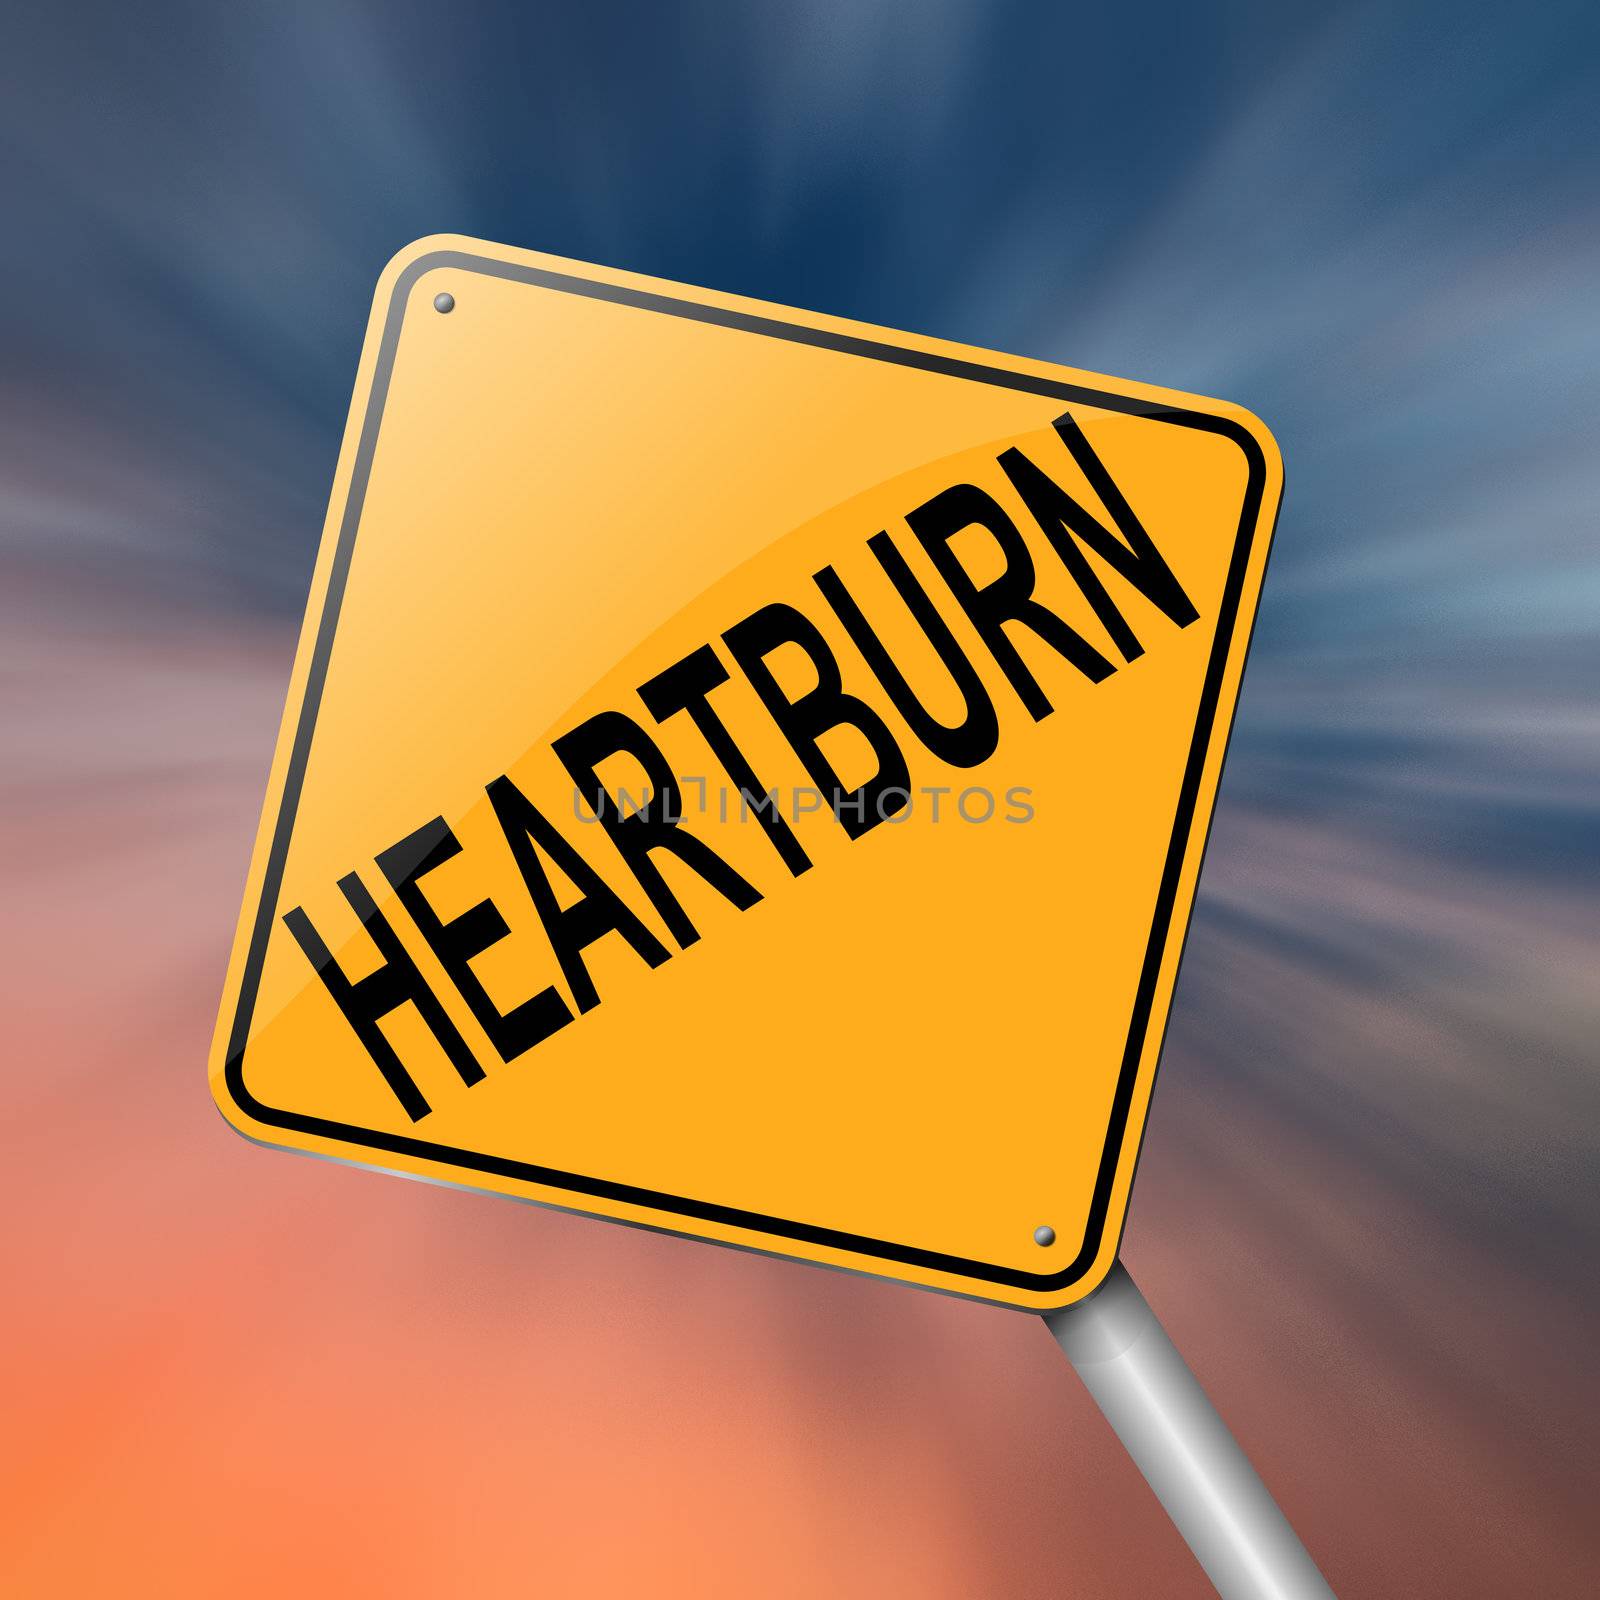 Illustration depicting a sign with a heartburn concept.